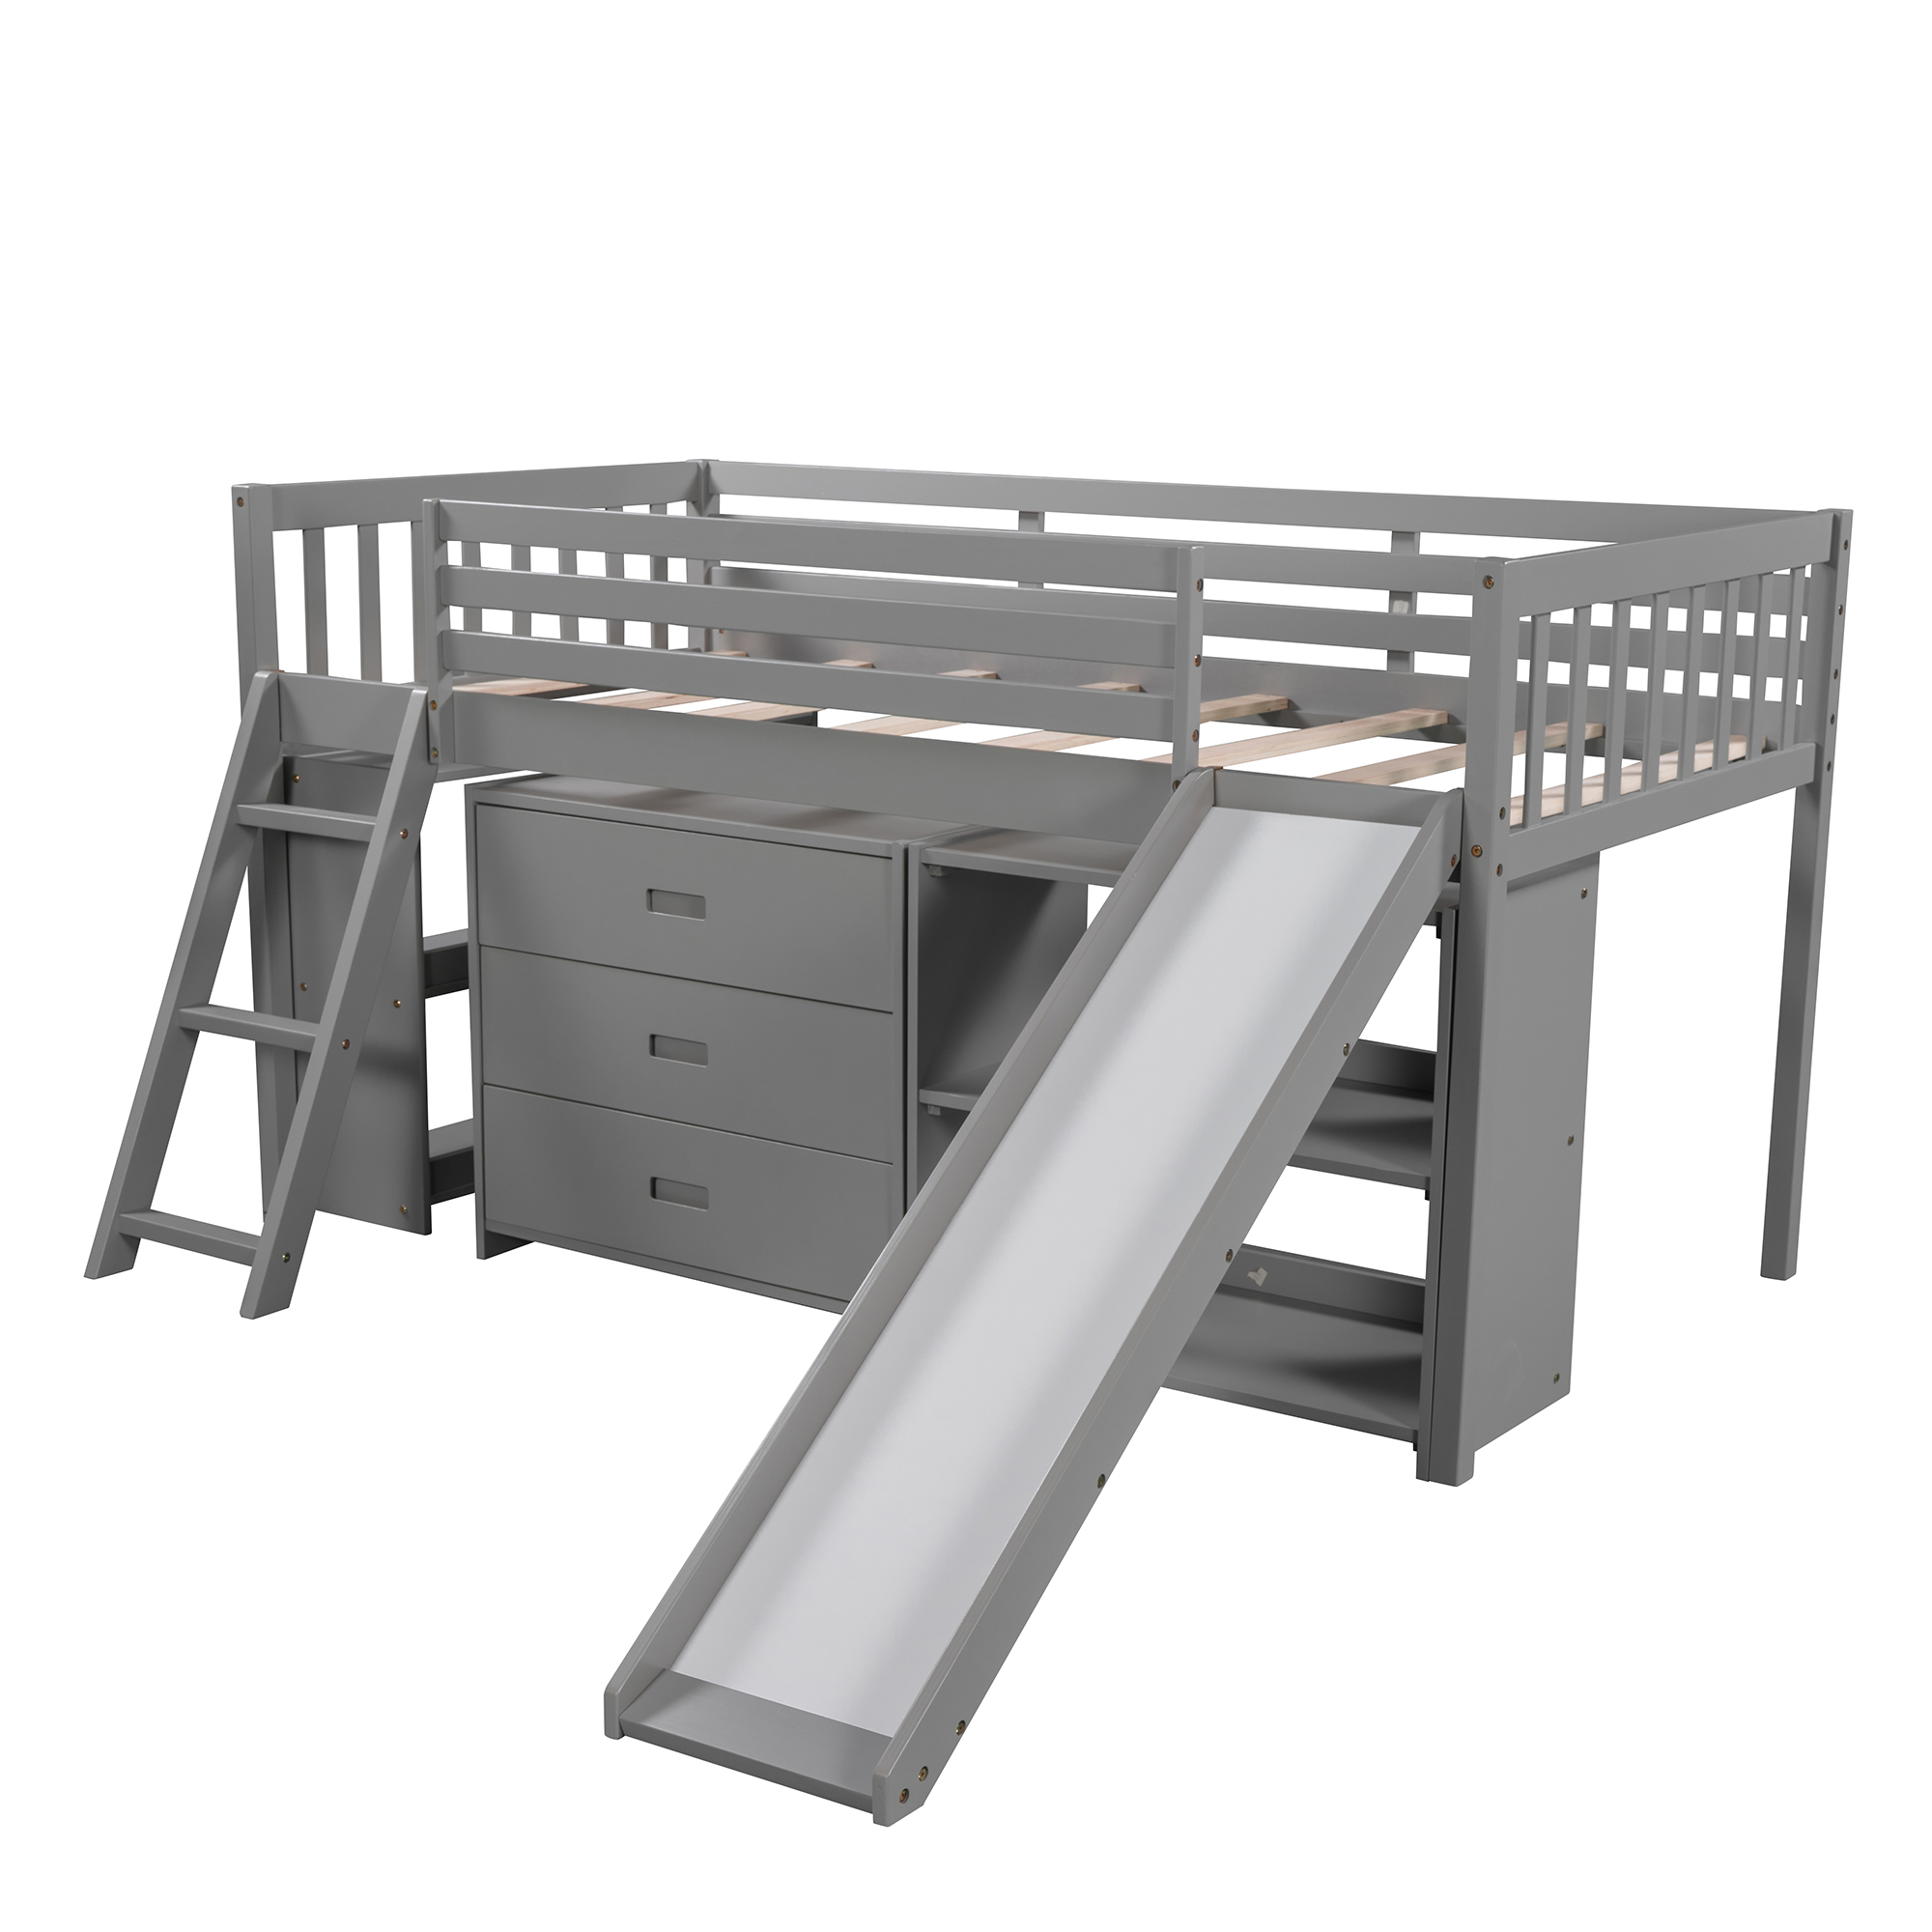 Euroco Wood Twin Size Low Loft Bed with Bookcase, Drawers, Ladder and Slide, Gray - image 5 of 12